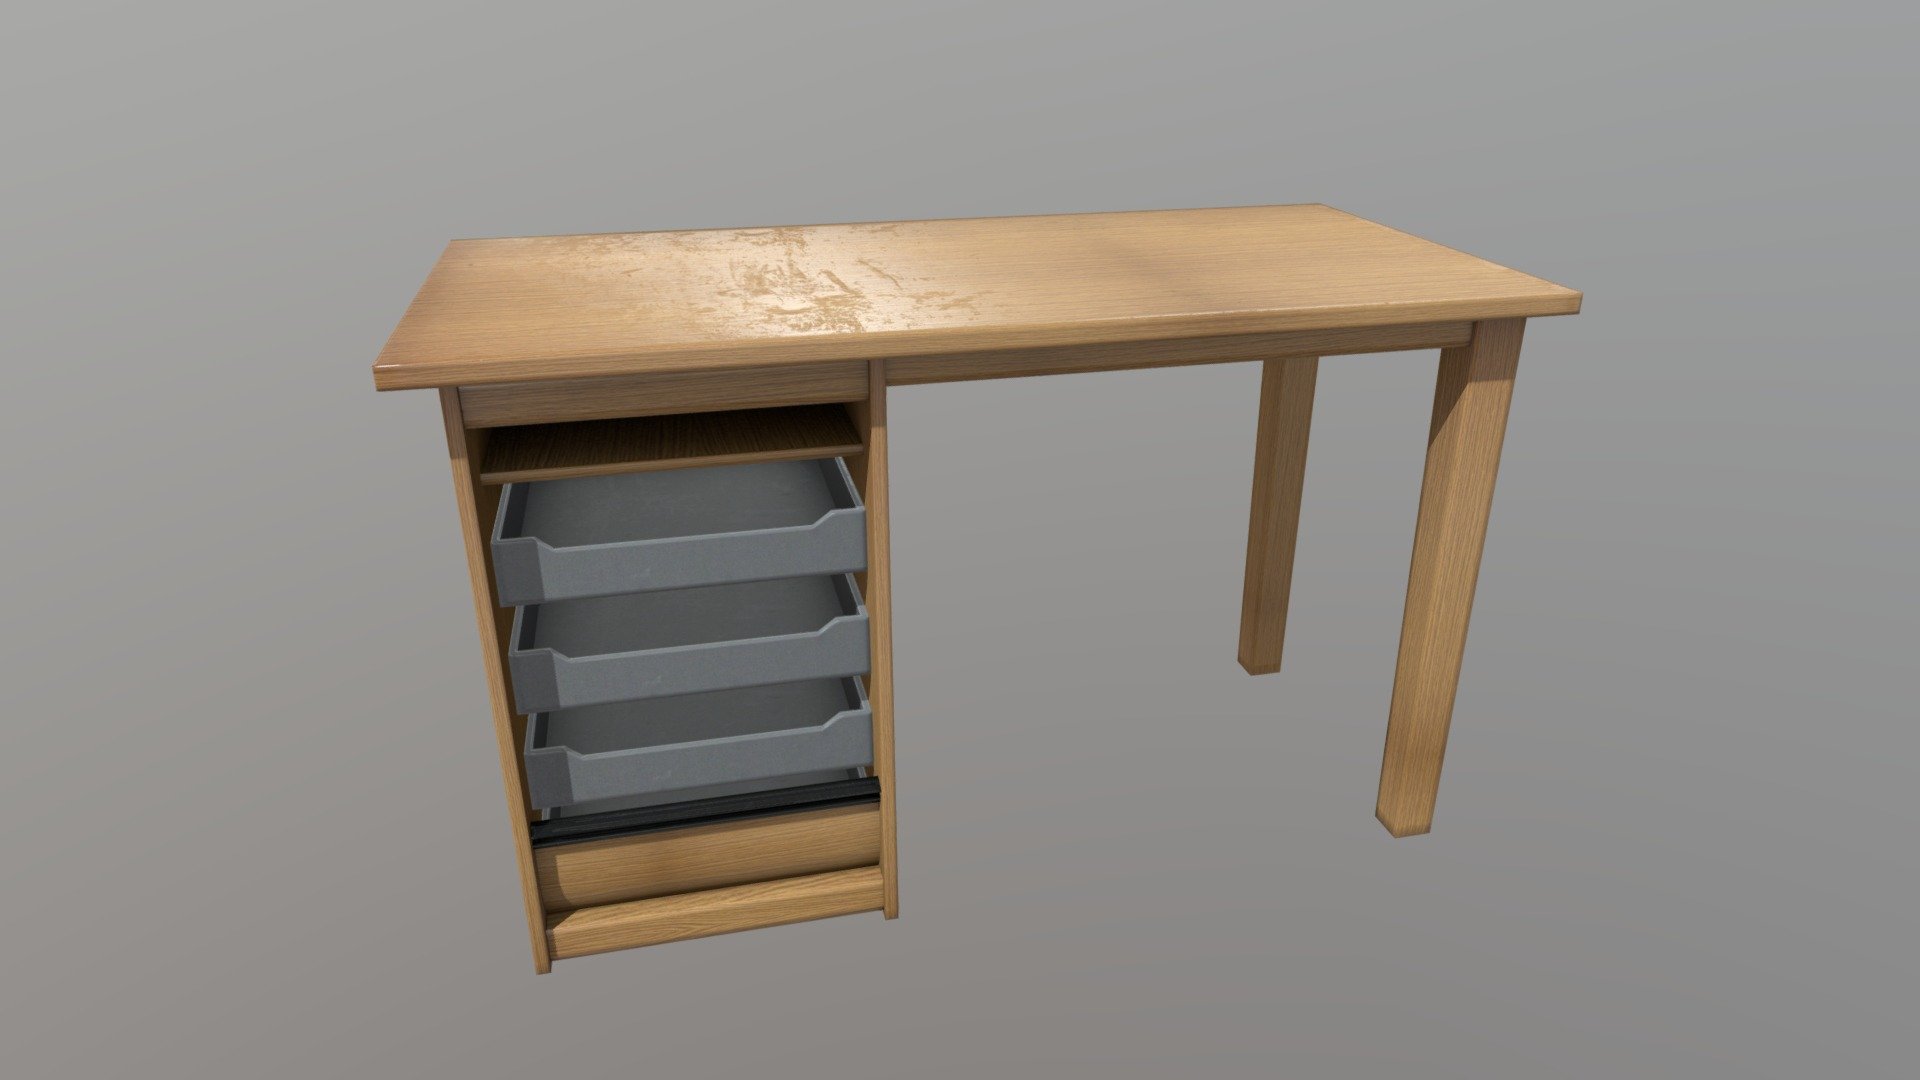 ‘Looks like the old Desk of my Dad, but a bit smaller.’

The normal map was baked from a high poly model. Includes x4096 textures for the desk and x2048 textures for the drawer.

You will find some more here.

If you need help with this model or have a question – please do not hesitate to contact with me. I will be happy to help you.

Contact: plaggy.net@gmail.com - Desk - Buy Royalty Free 3D model by plaggy 3d model